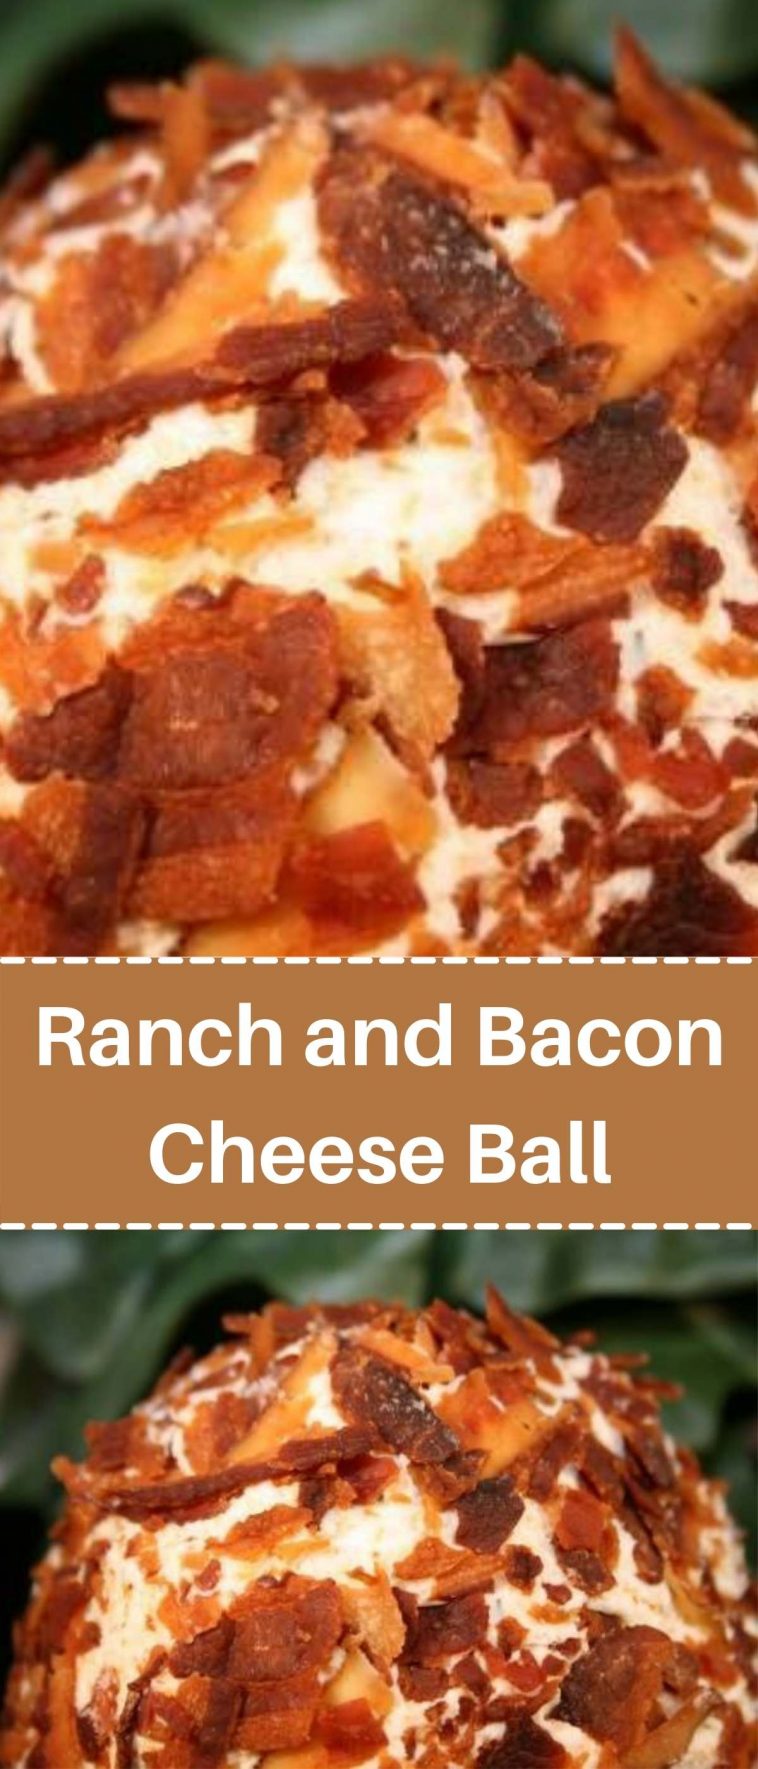 Ranch and Bacon Cheese Ball